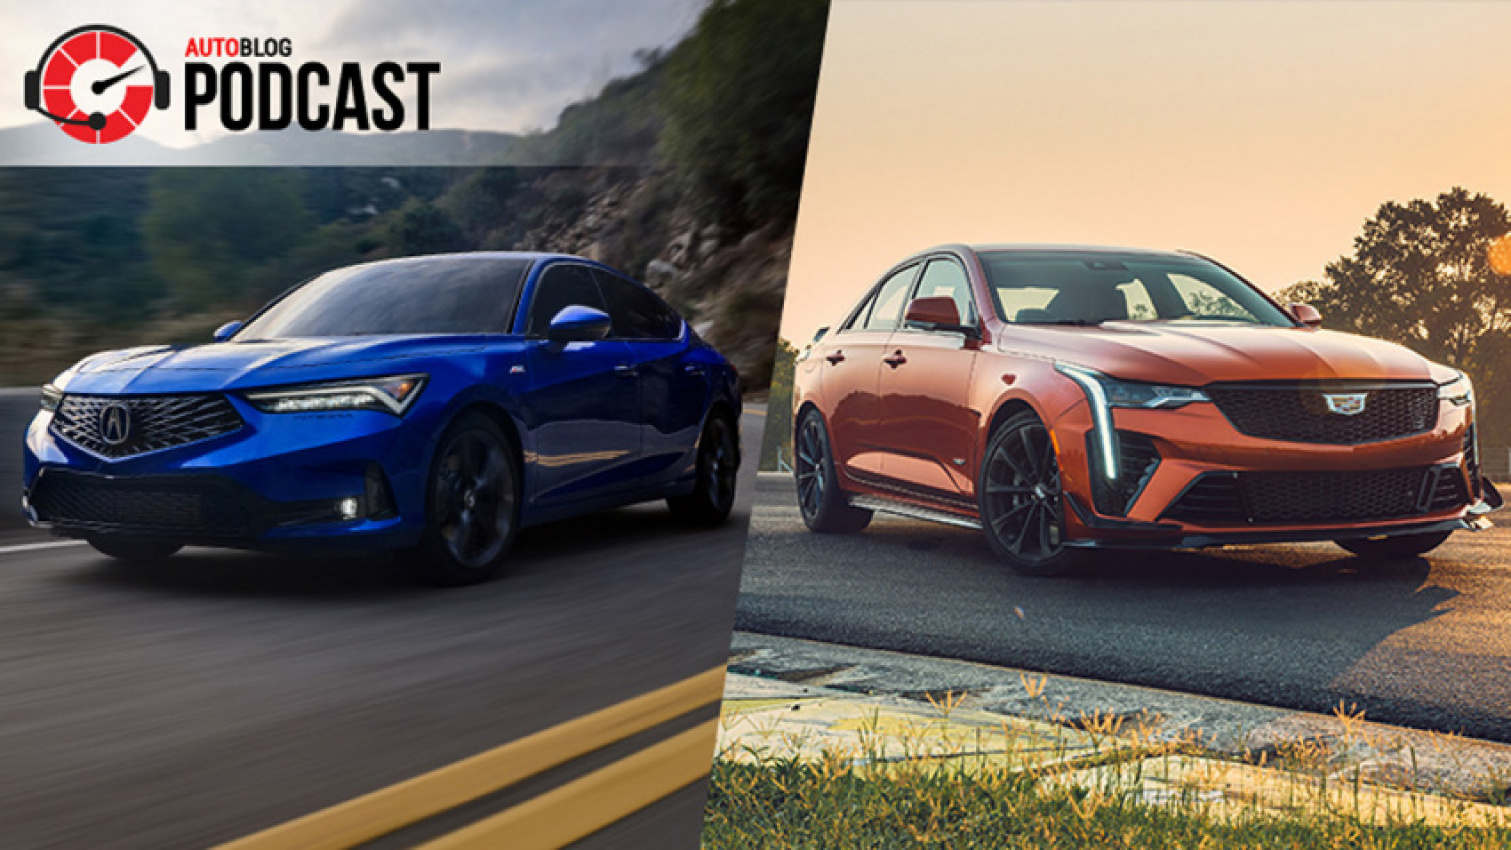 acura, autos, cadillac, cars, porsche, chip shortage, electric, ford, green, green automakers, luxury, performance, podcasts, porsche taycan, sedan, stellantis, tesla, acura integra, cadillac ct4-v blackwing, porsche taycan | autoblog podcast #721